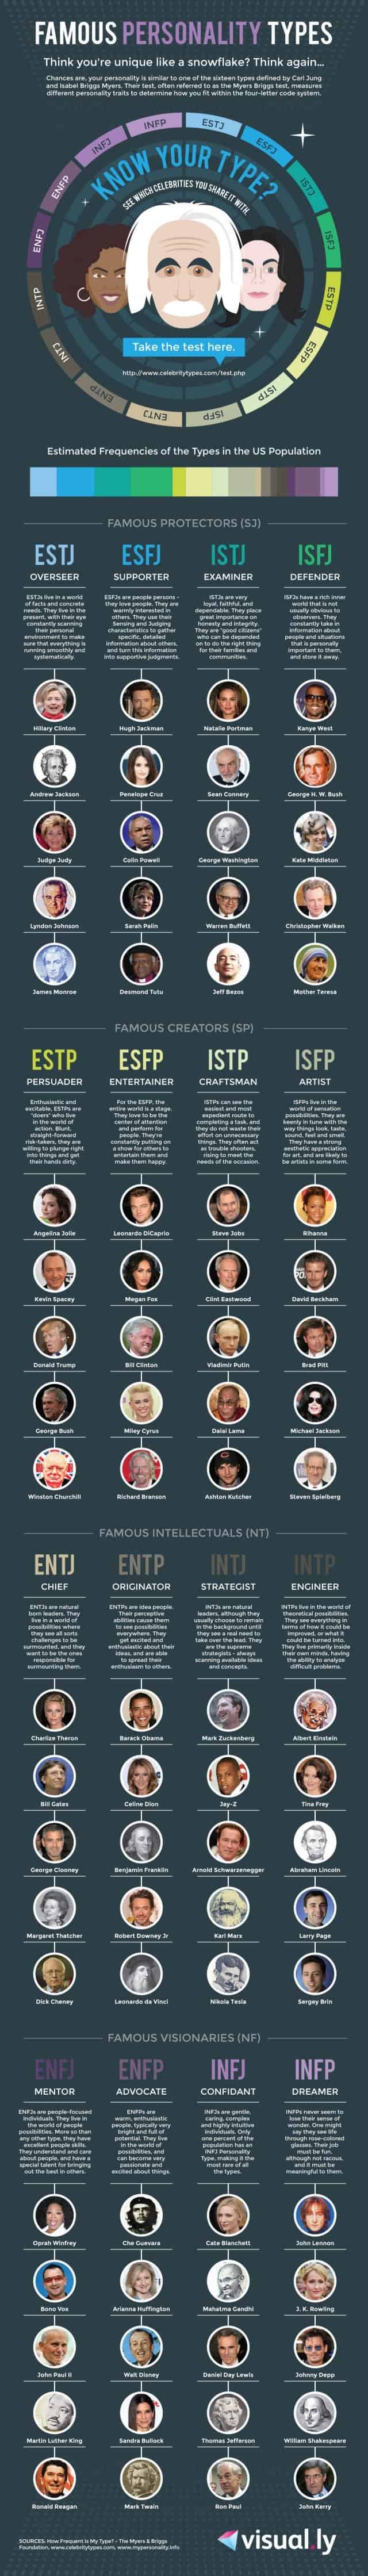 Famous Personality Types [Infographic] | Daily Infographic